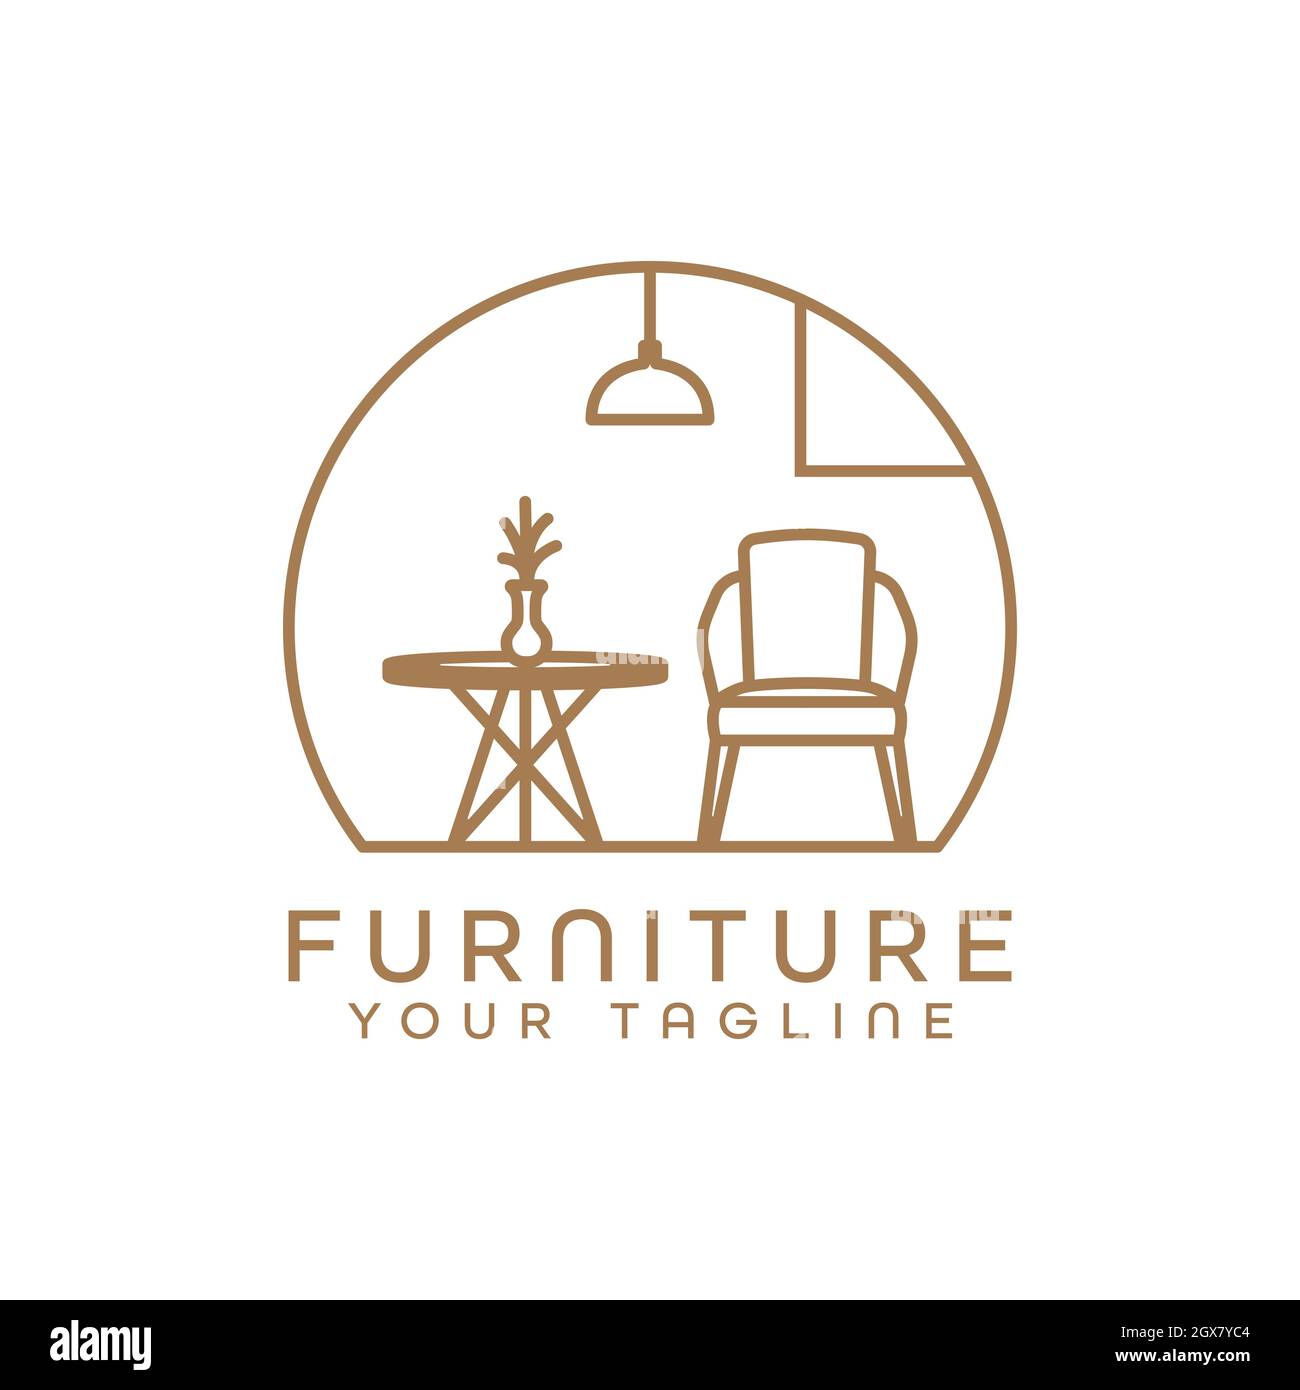 furniture logo minimalist room interior chairs and tables Stock Vector